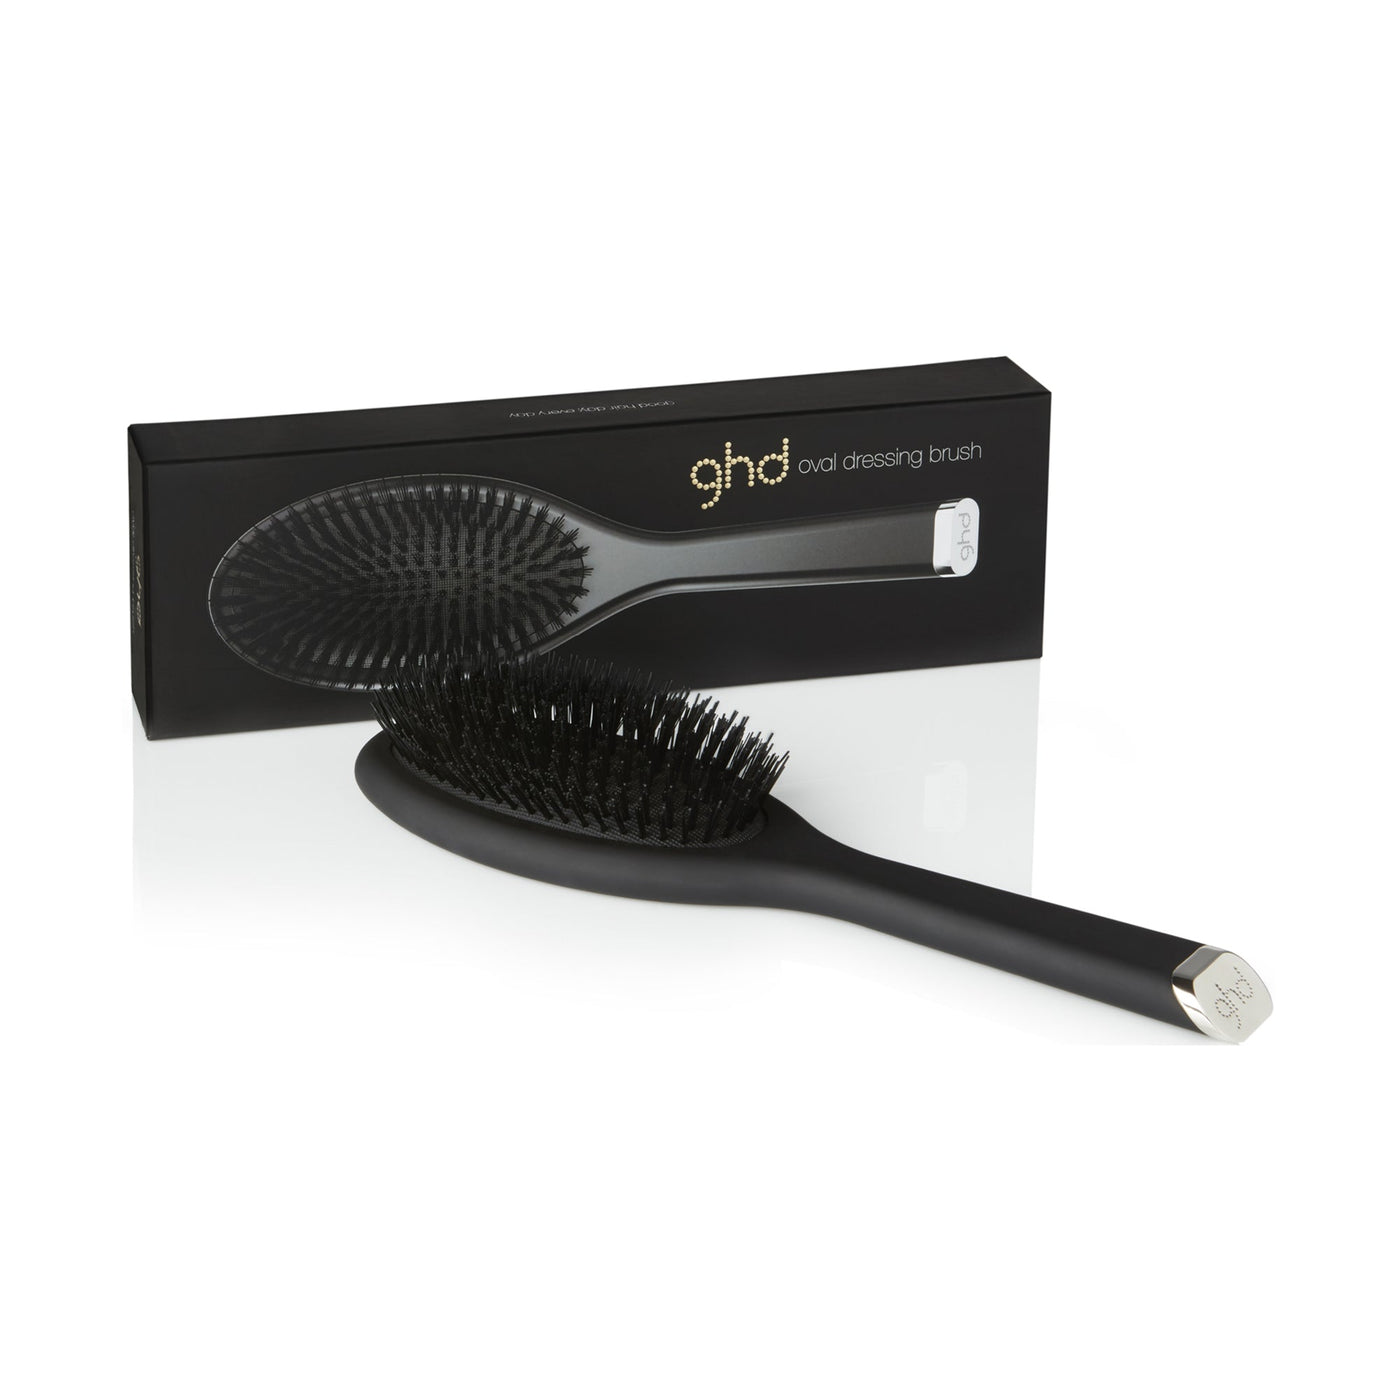 ghd Oval Dressing Brush - packaging